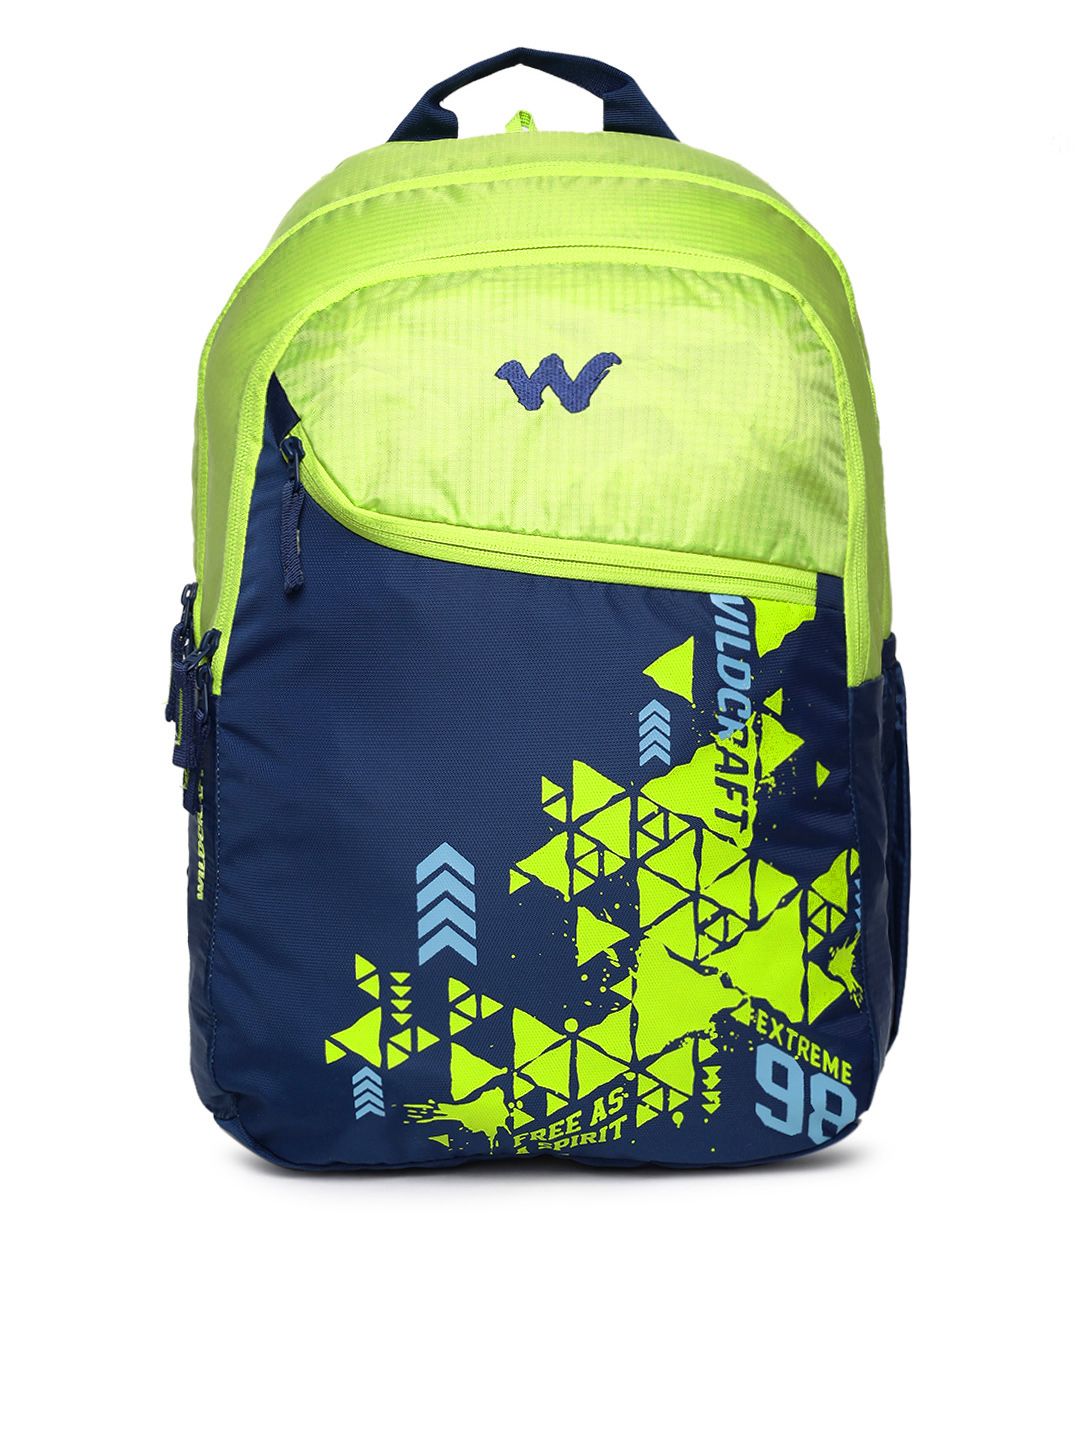 Wildcraft Unisex Green & Navy Blue Graphic Backpack Price in India